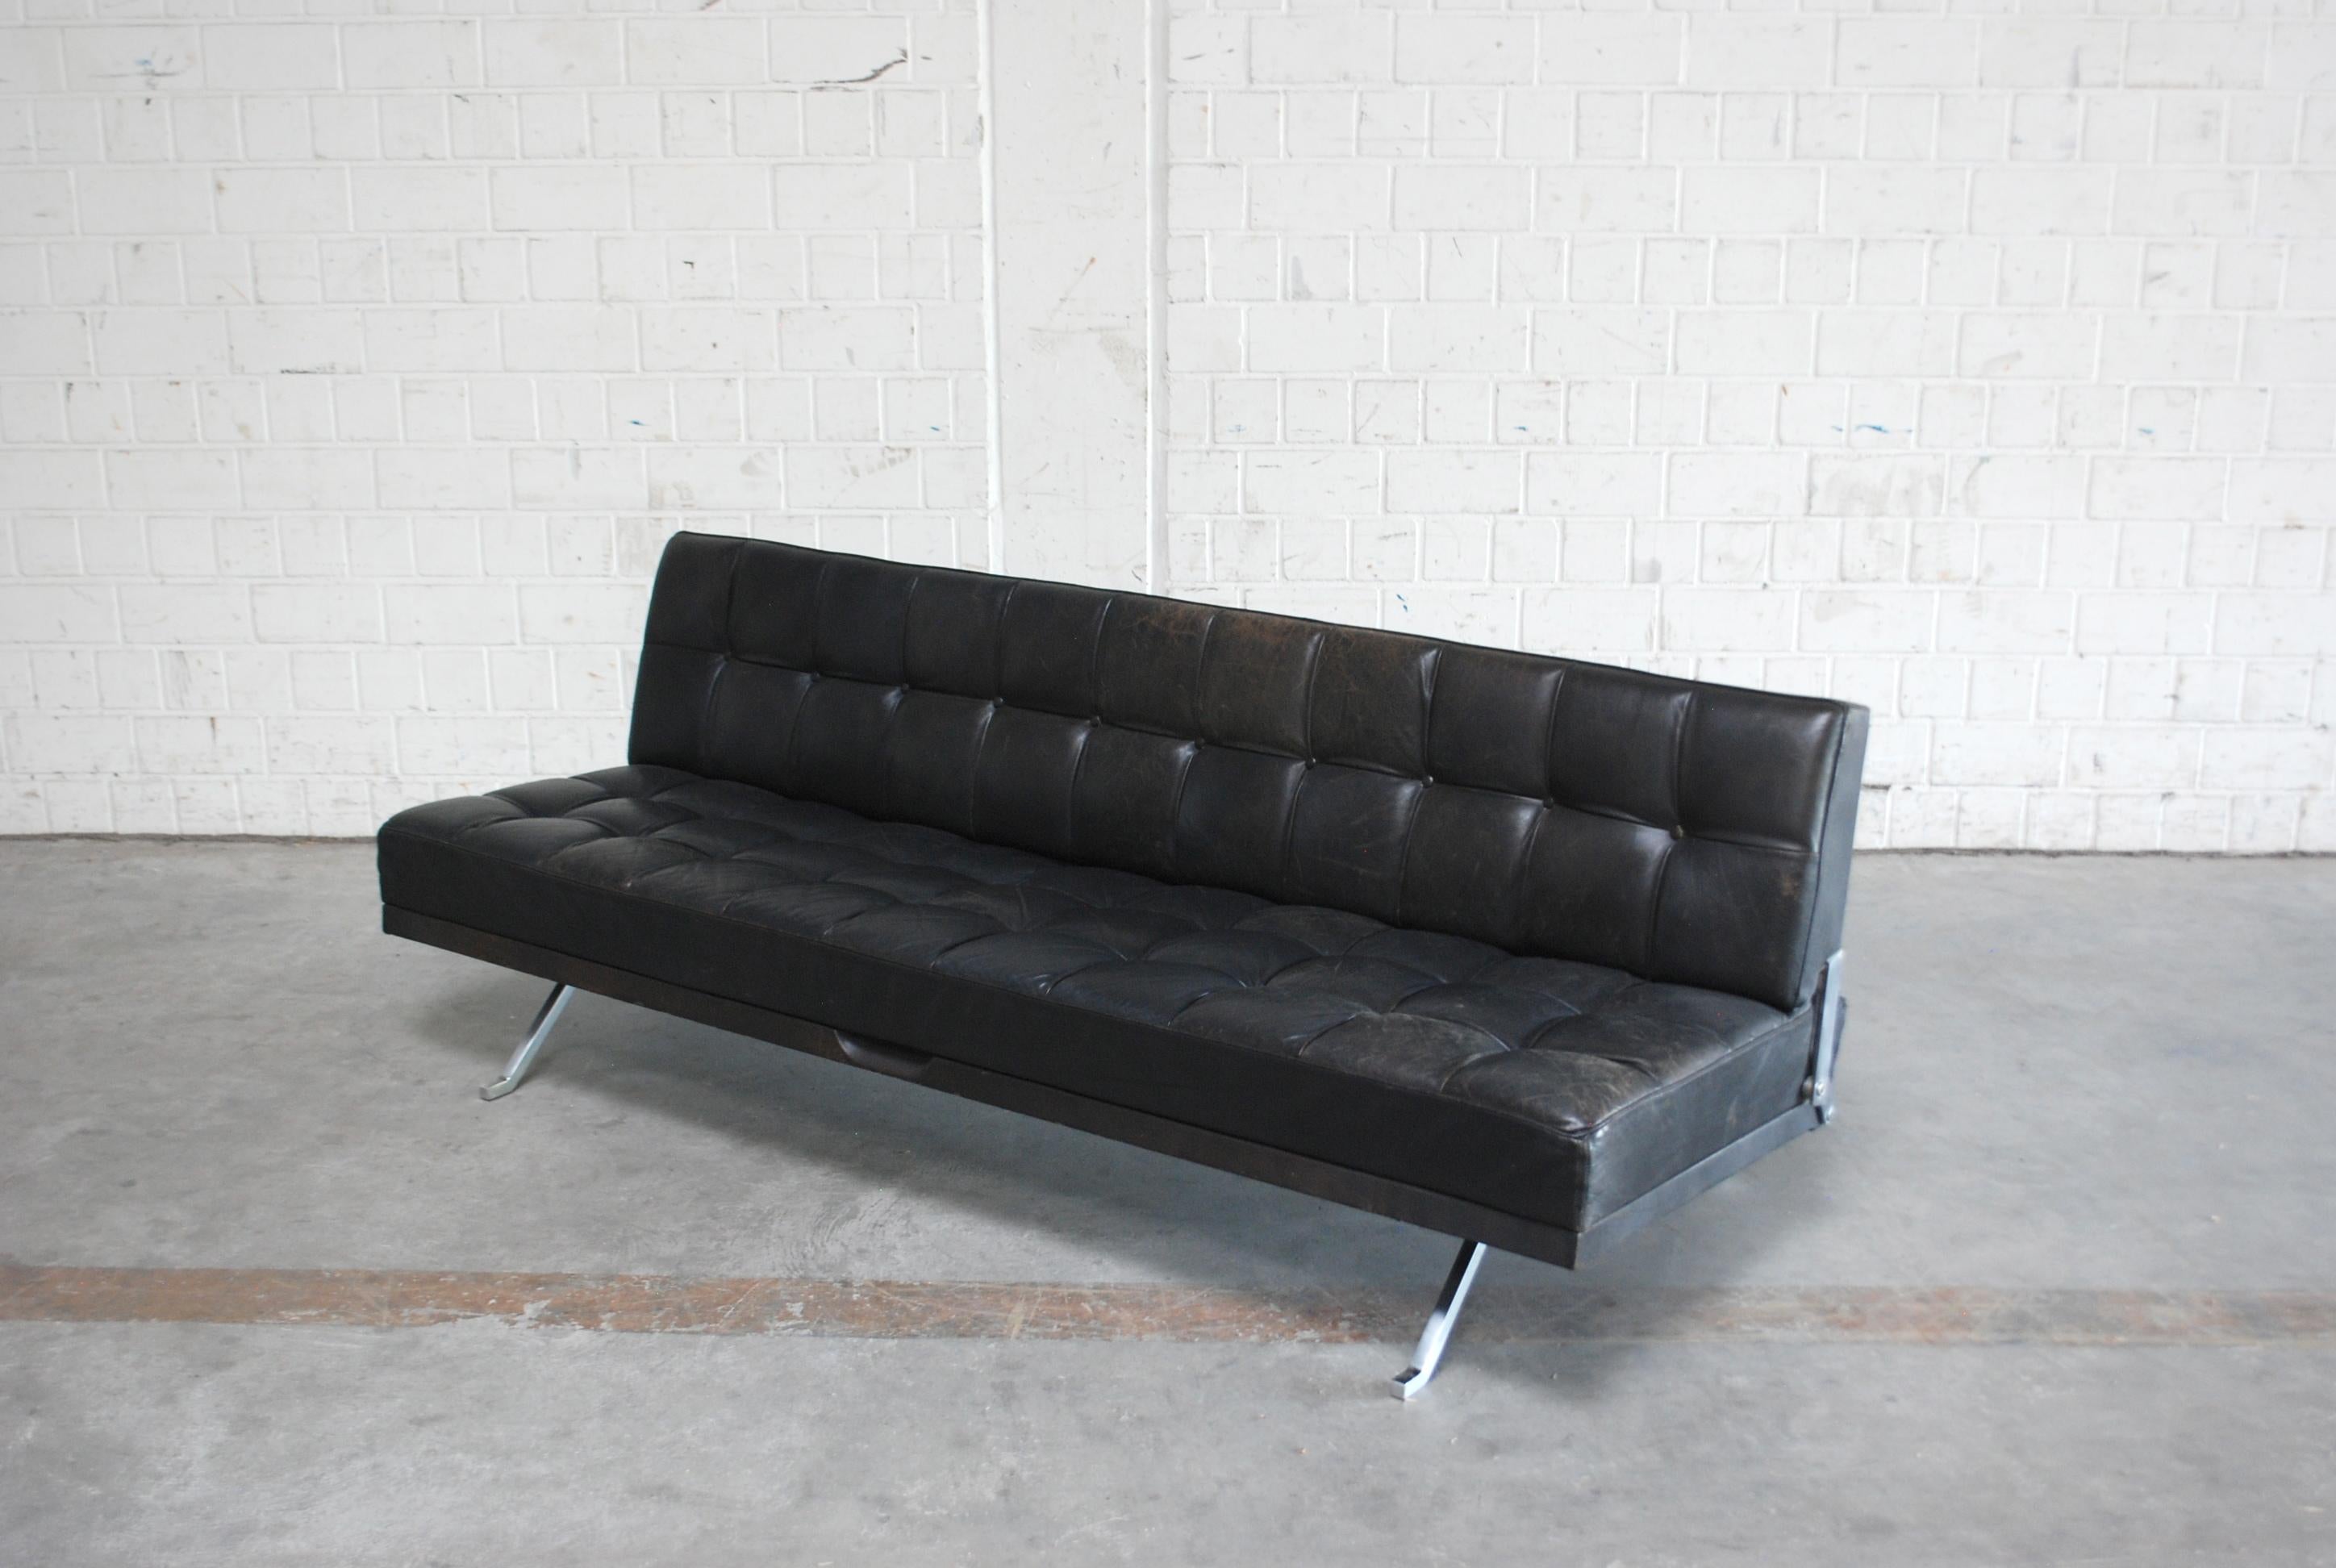 Daybed Modell Constanze by Austrian architect Johannes Spalt for Wittmann. 
A classic Mid Century Daybed in tufted design.
Produced in the 1960s.
Black Aniline leather. The sofa is convertible into a daybed. Size 200 x 107 cm.